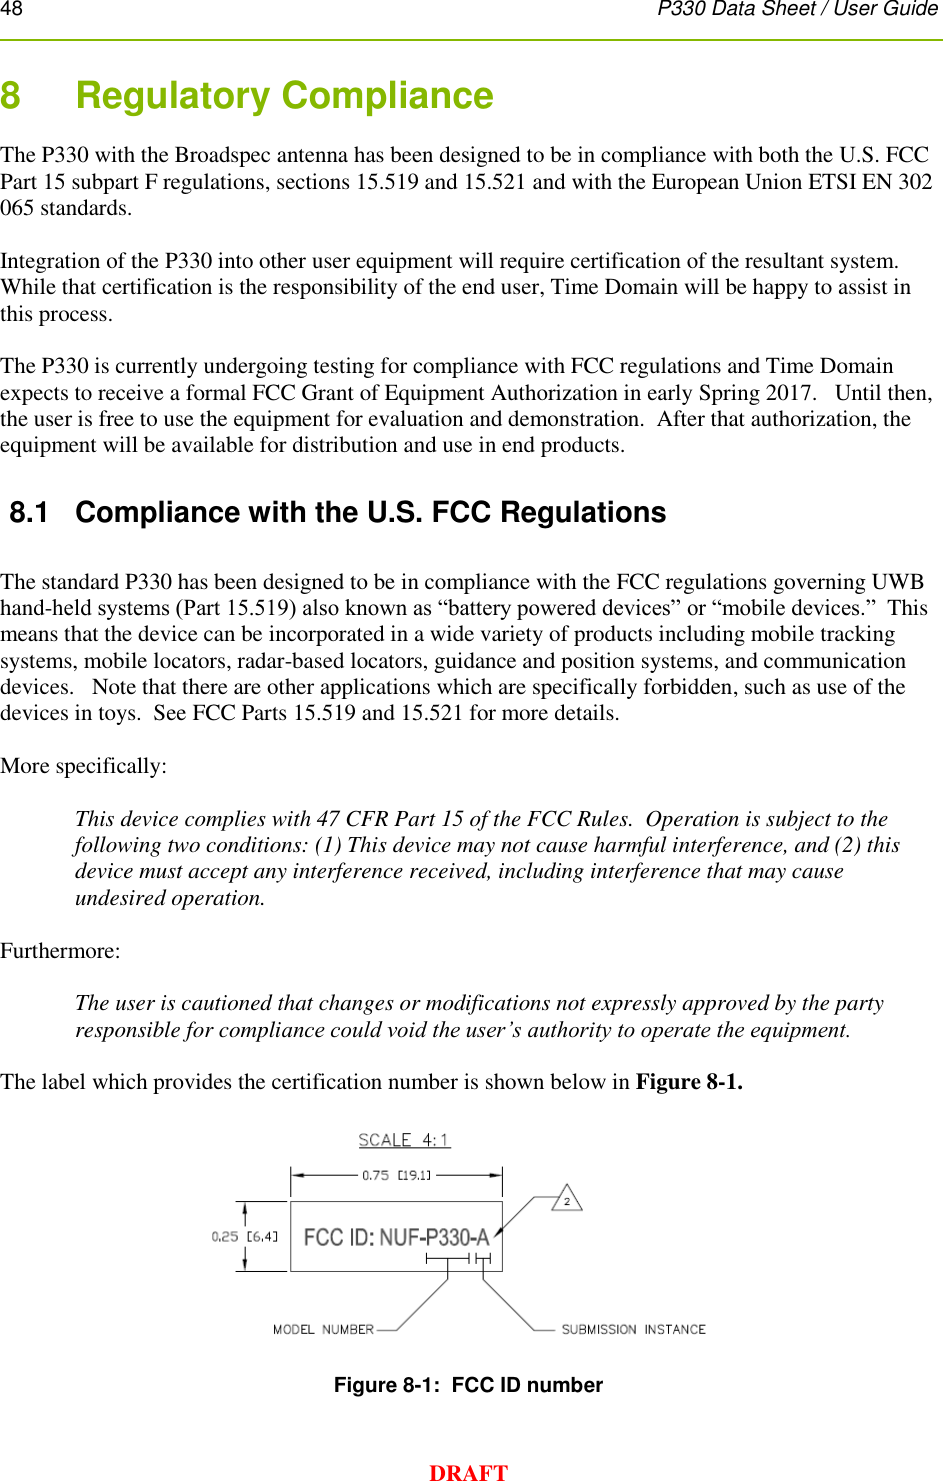 48      P330 Data Sheet / User Guide  DRAFT 8    Regulatory Compliance  The P330 with the Broadspec antenna has been designed to be in compliance with both the U.S. FCC Part 15 subpart F regulations, sections 15.519 and 15.521 and with the European Union ETSI EN 302 065 standards.   Integration of the P330 into other user equipment will require certification of the resultant system.  While that certification is the responsibility of the end user, Time Domain will be happy to assist in this process.  The P330 is currently undergoing testing for compliance with FCC regulations and Time Domain expects to receive a formal FCC Grant of Equipment Authorization in early Spring 2017.   Until then, the user is free to use the equipment for evaluation and demonstration.  After that authorization, the equipment will be available for distribution and use in end products. 8.1  Compliance with the U.S. FCC Regulations  The standard P330 has been designed to be in compliance with the FCC regulations governing UWB hand-held systems (Part 15.519) also known as “battery powered devices” or “mobile devices.”  This means that the device can be incorporated in a wide variety of products including mobile tracking systems, mobile locators, radar-based locators, guidance and position systems, and communication devices.   Note that there are other applications which are specifically forbidden, such as use of the devices in toys.  See FCC Parts 15.519 and 15.521 for more details.  More specifically:  This device complies with 47 CFR Part 15 of the FCC Rules.  Operation is subject to the following two conditions: (1) This device may not cause harmful interference, and (2) this device must accept any interference received, including interference that may cause undesired operation.  Furthermore:  The user is cautioned that changes or modifications not expressly approved by the party responsible for compliance could void the user’s authority to operate the equipment.  The label which provides the certification number is shown below in Figure 8-1.        Figure 8-1:  FCC ID number  